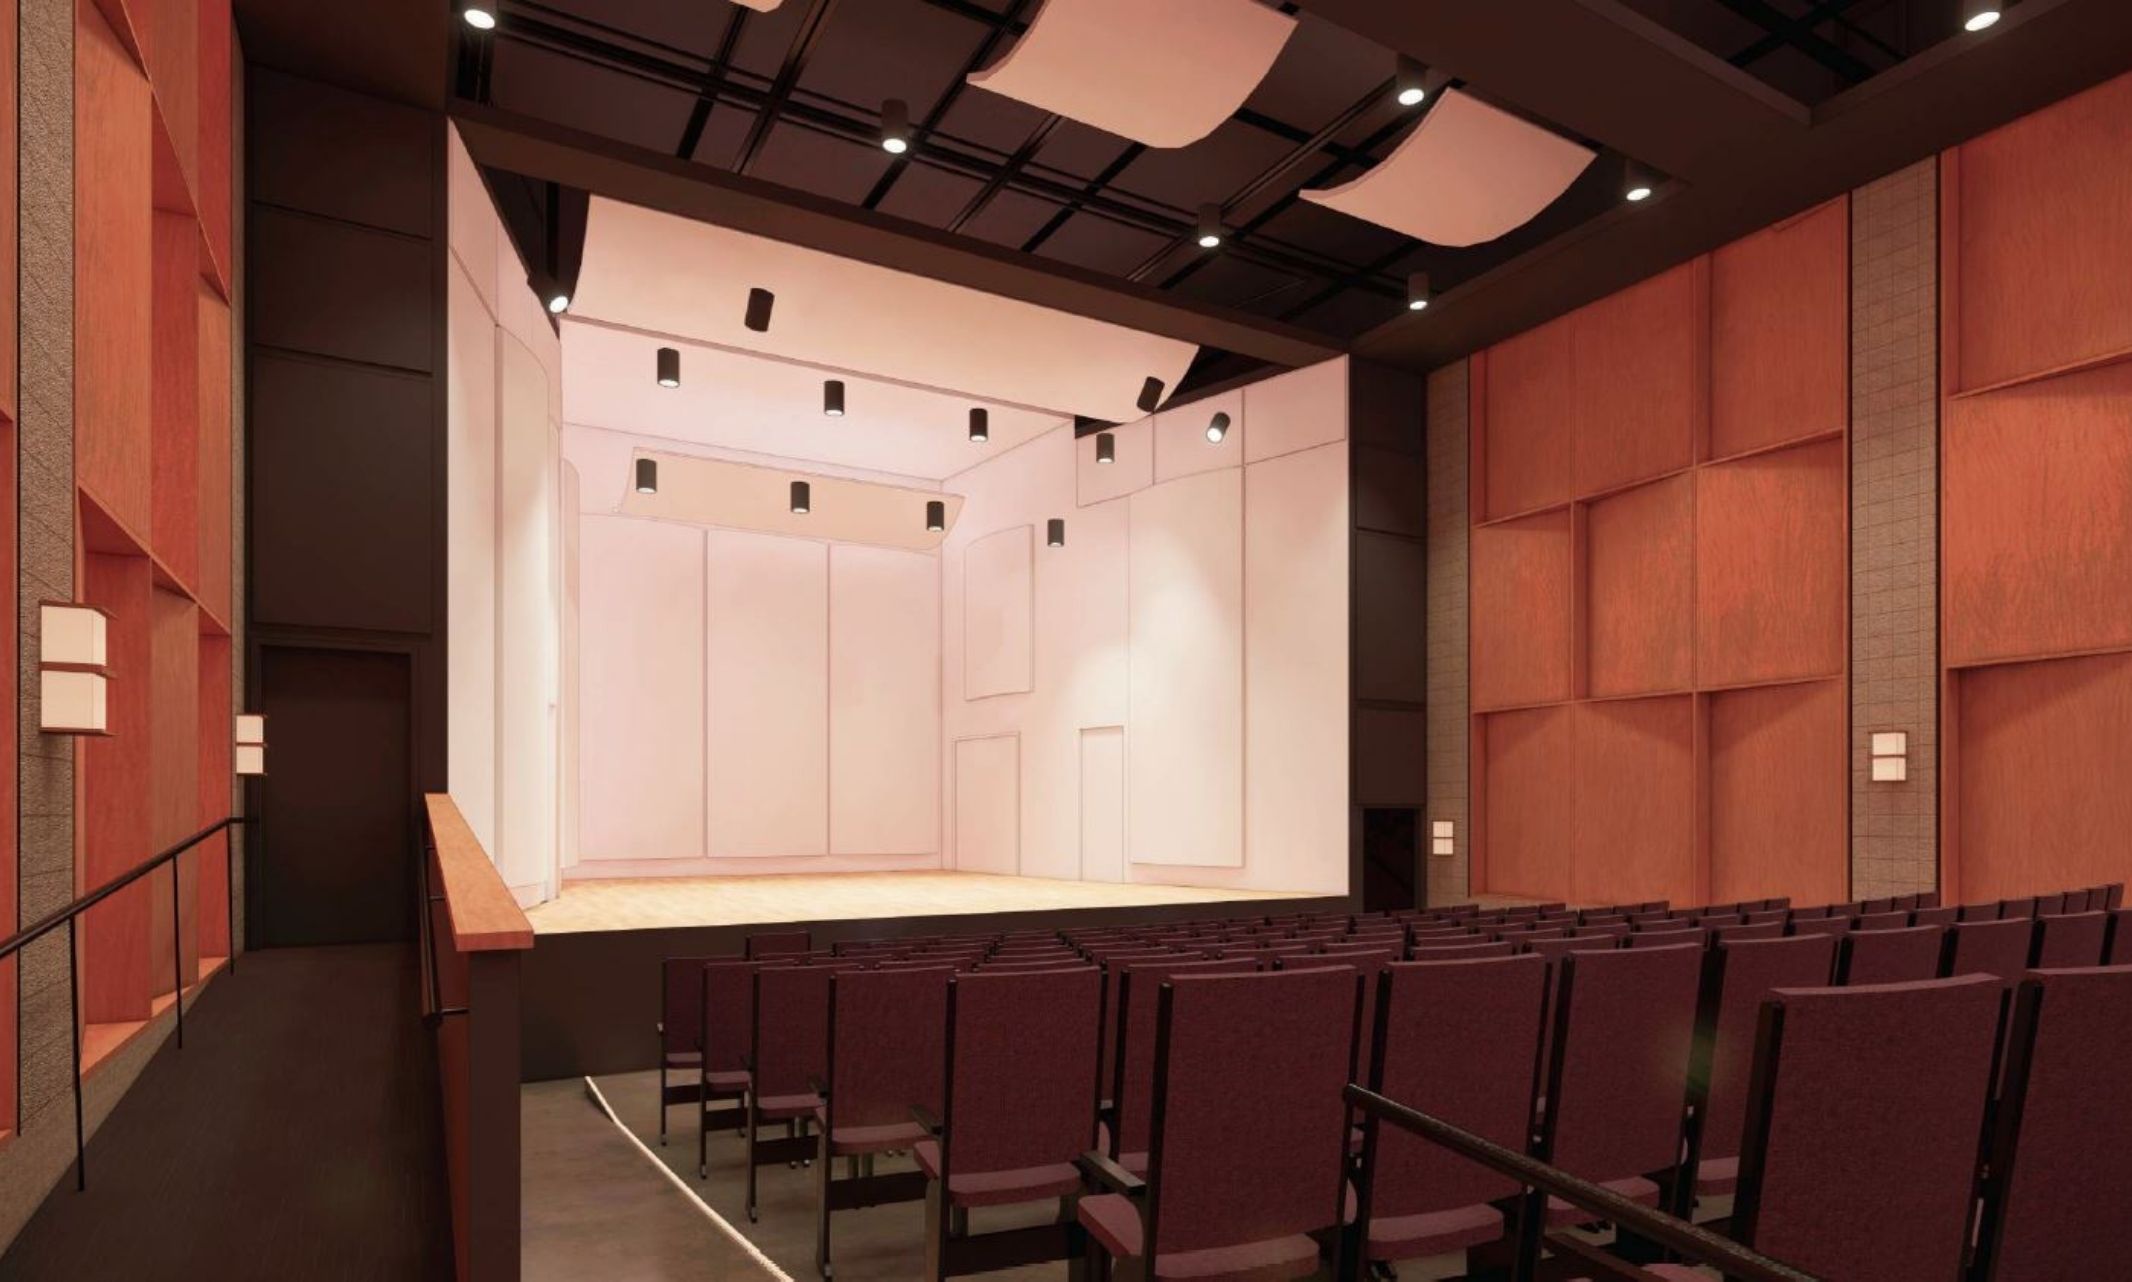 Rendering of new Grant Hall recital hall space - shows stage with empty recital hall seats